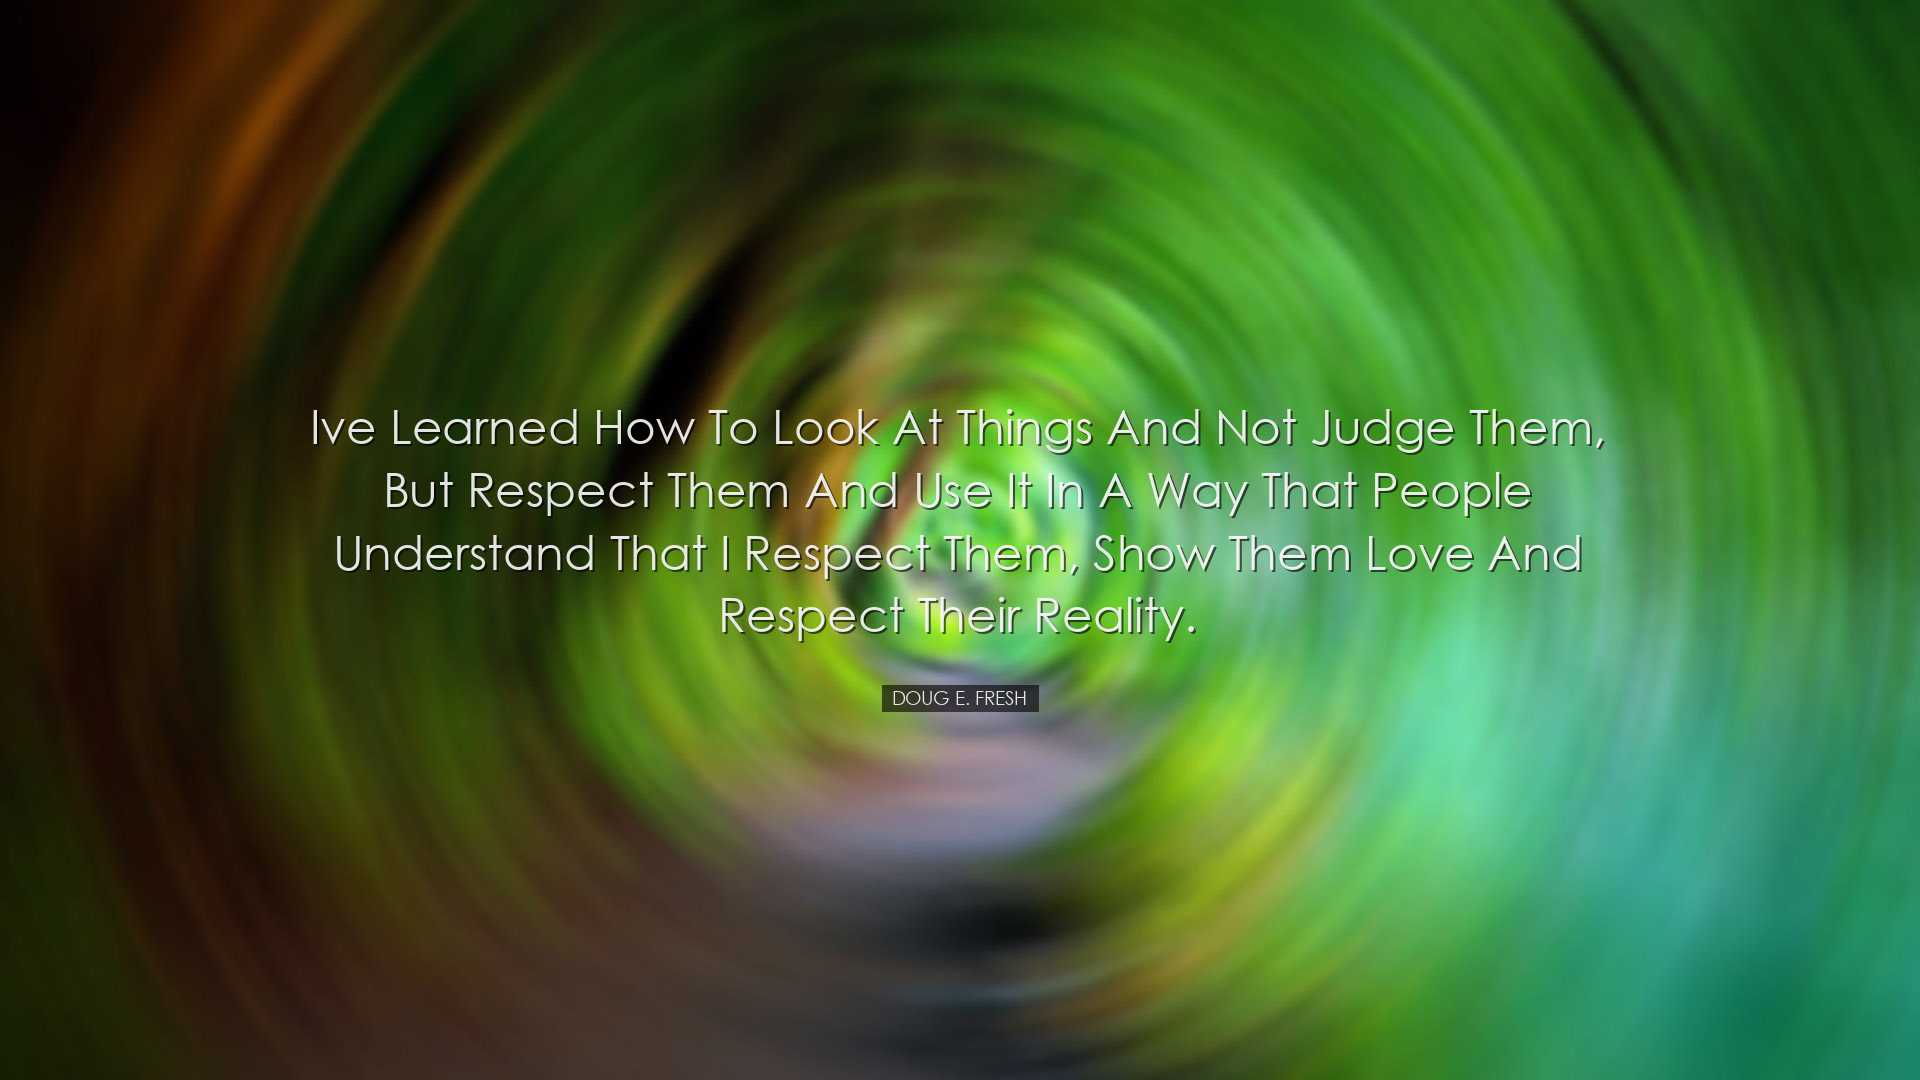 Ive learned how to look at things and not judge them, but respect